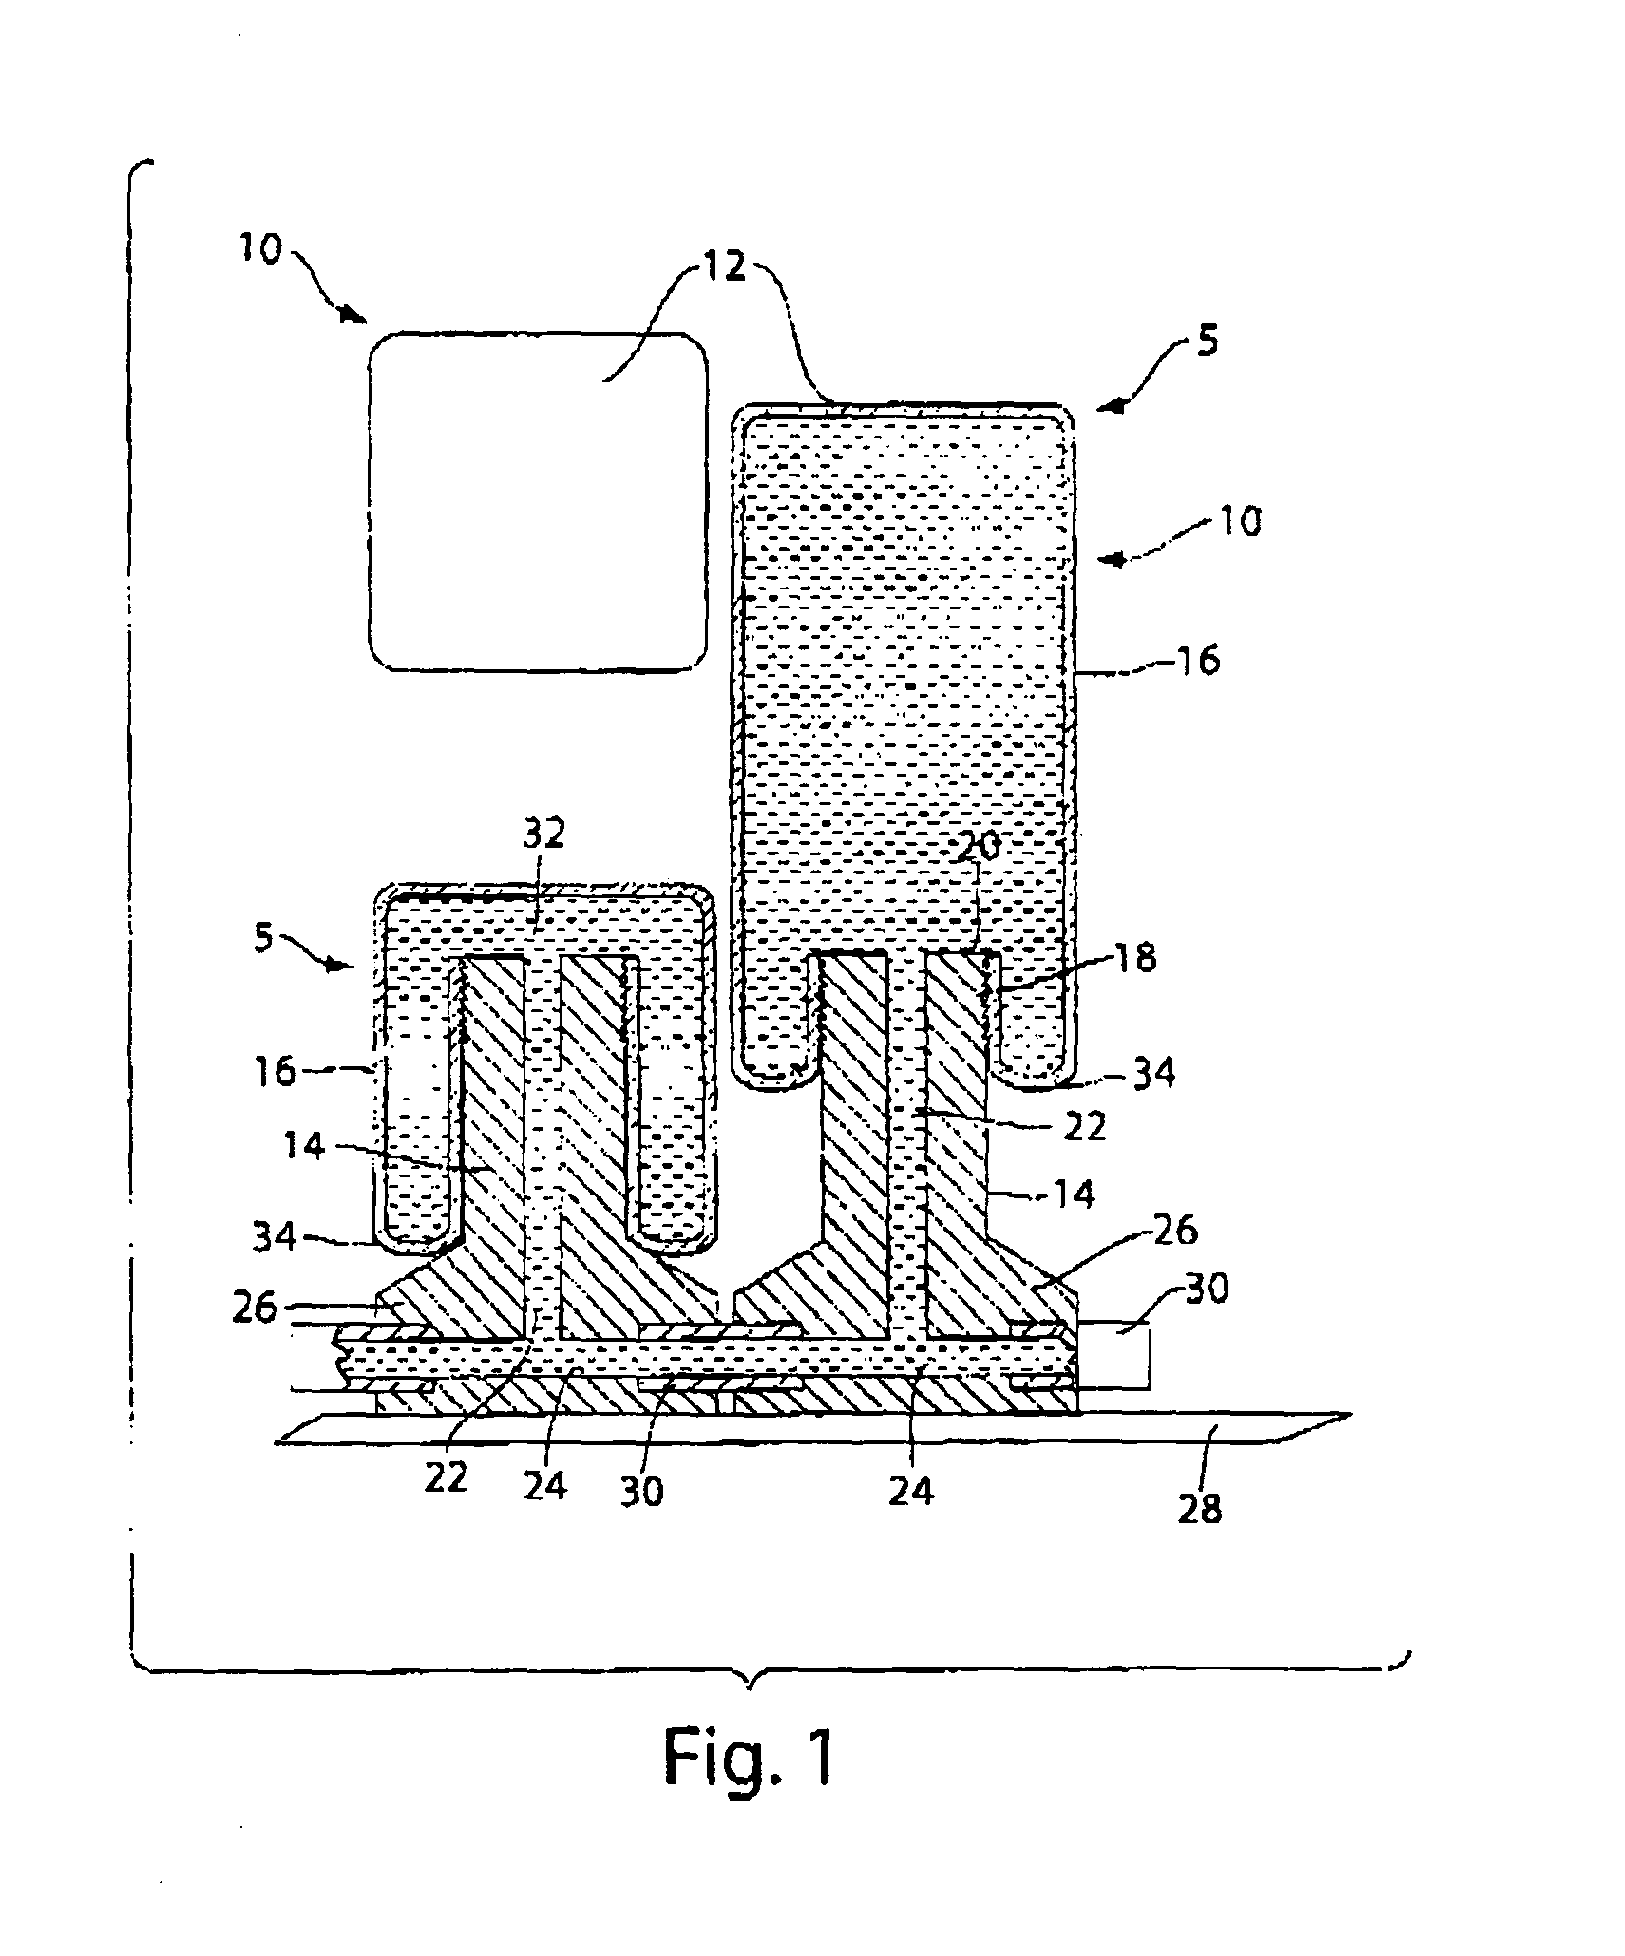 Device for supporting a user's body